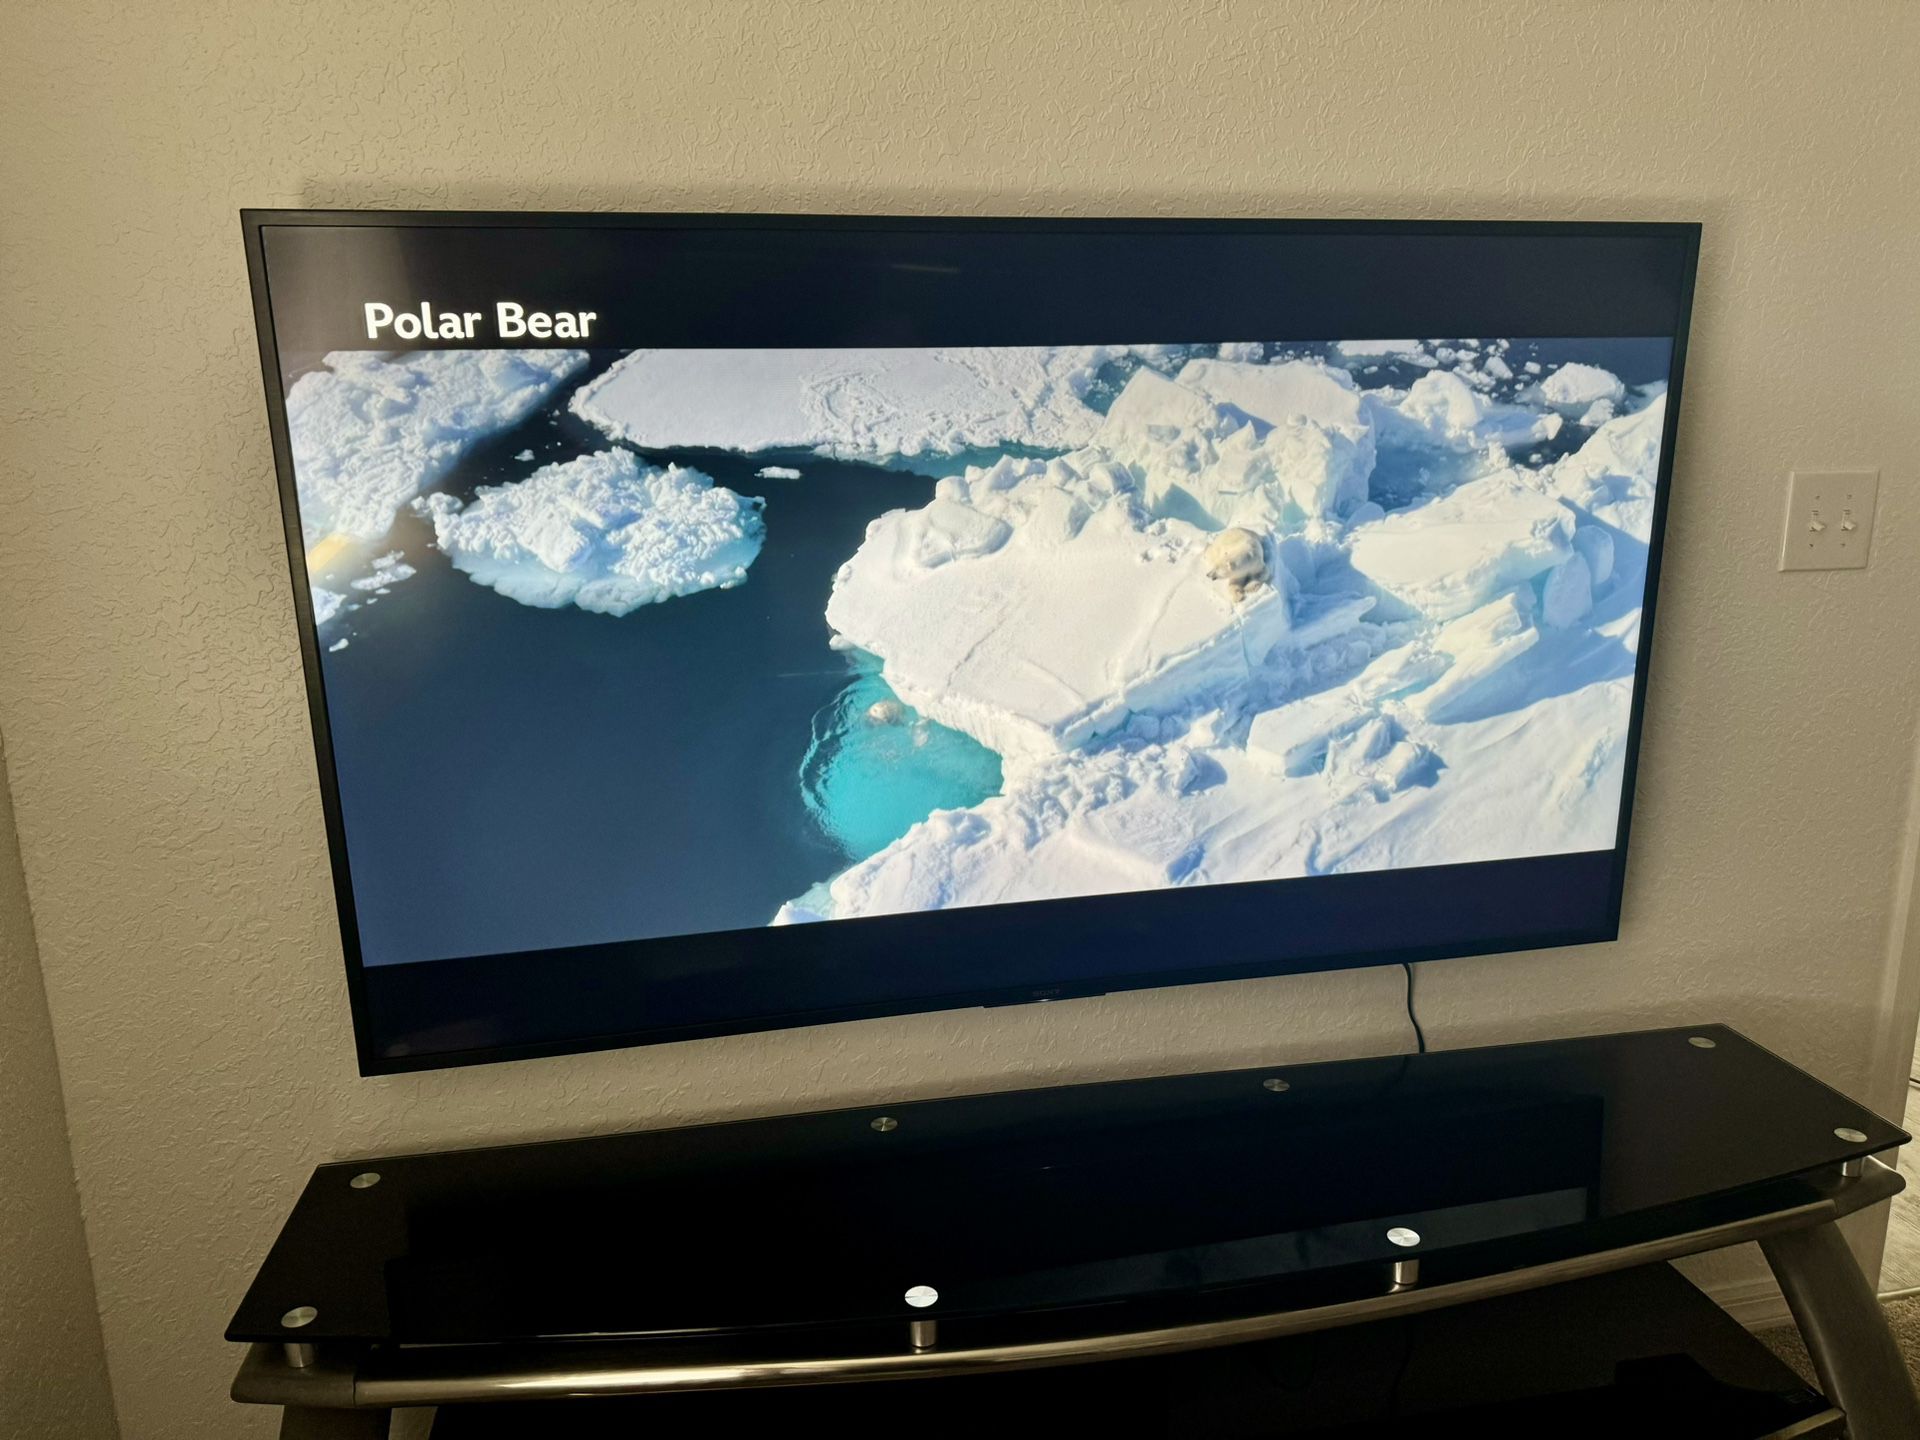 65” Sony Bravia Smart TV includes mount and brackets